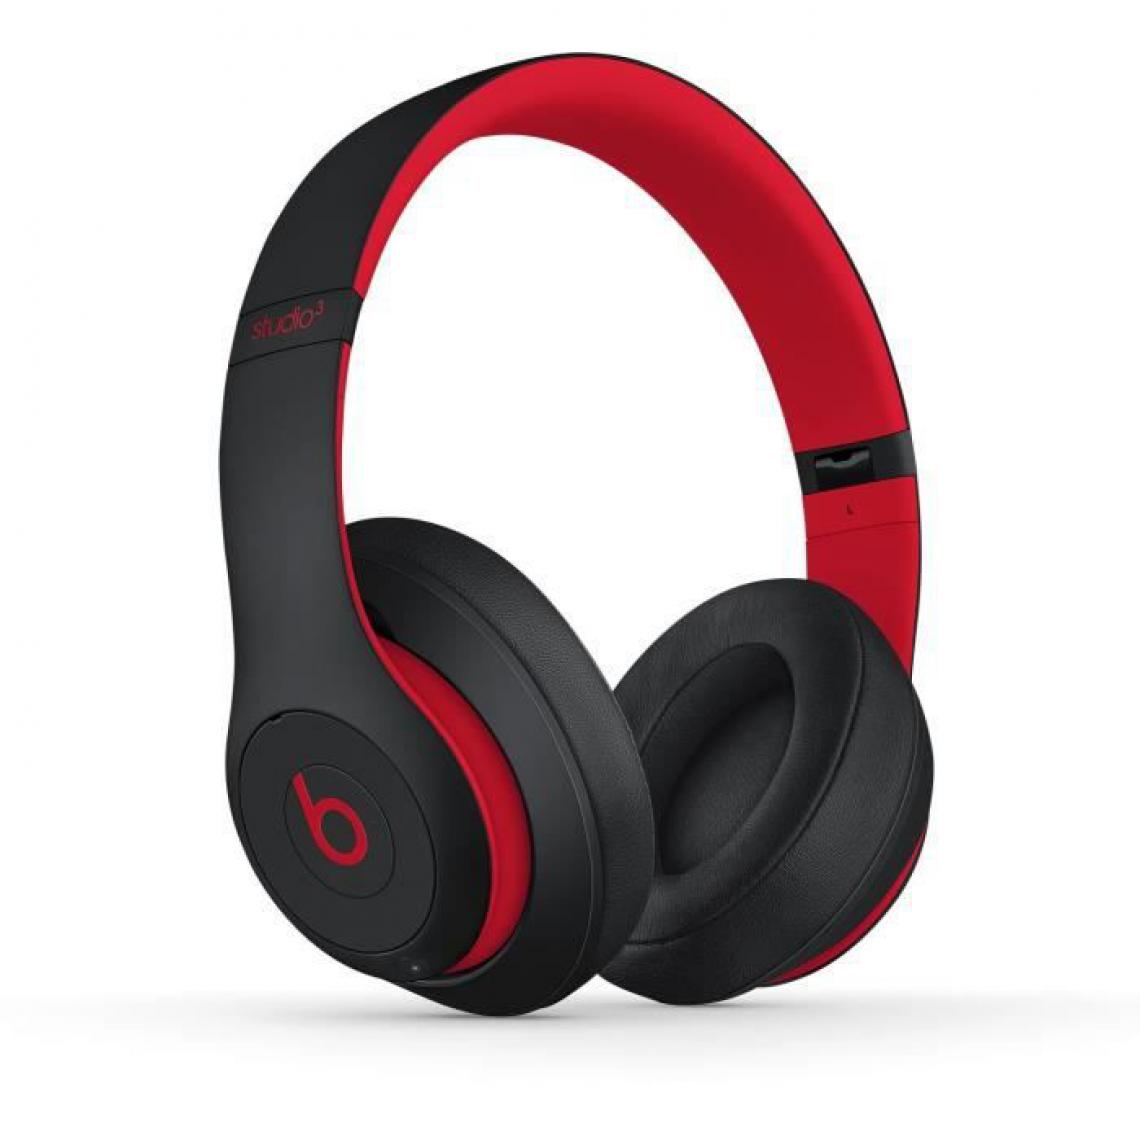 Beats by dr.dre - Beats Studio3 Wireless Over-Ear Headphones - The Beats Decade Collection - Defiant Black-Red - Casque